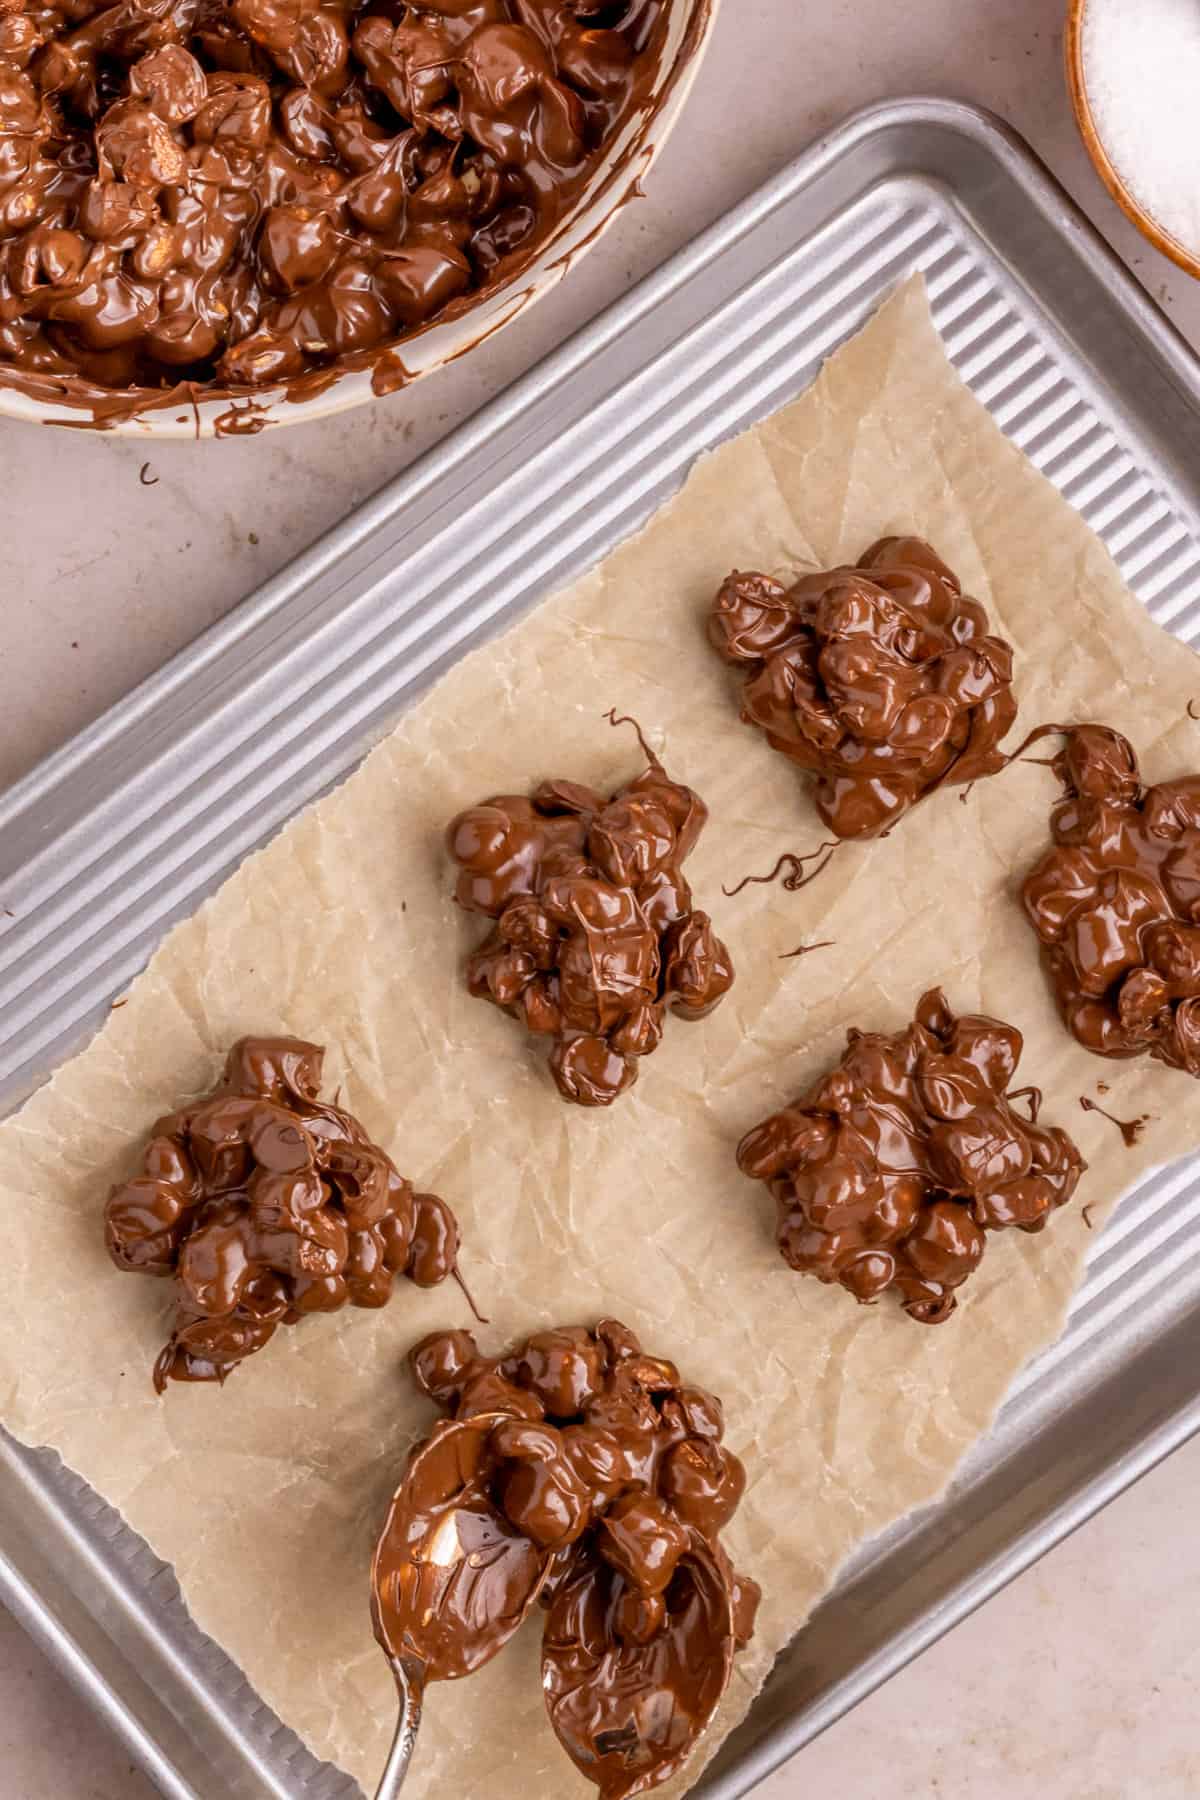 Clusters of candy being scooped onto lined baking sheets with two spoons.